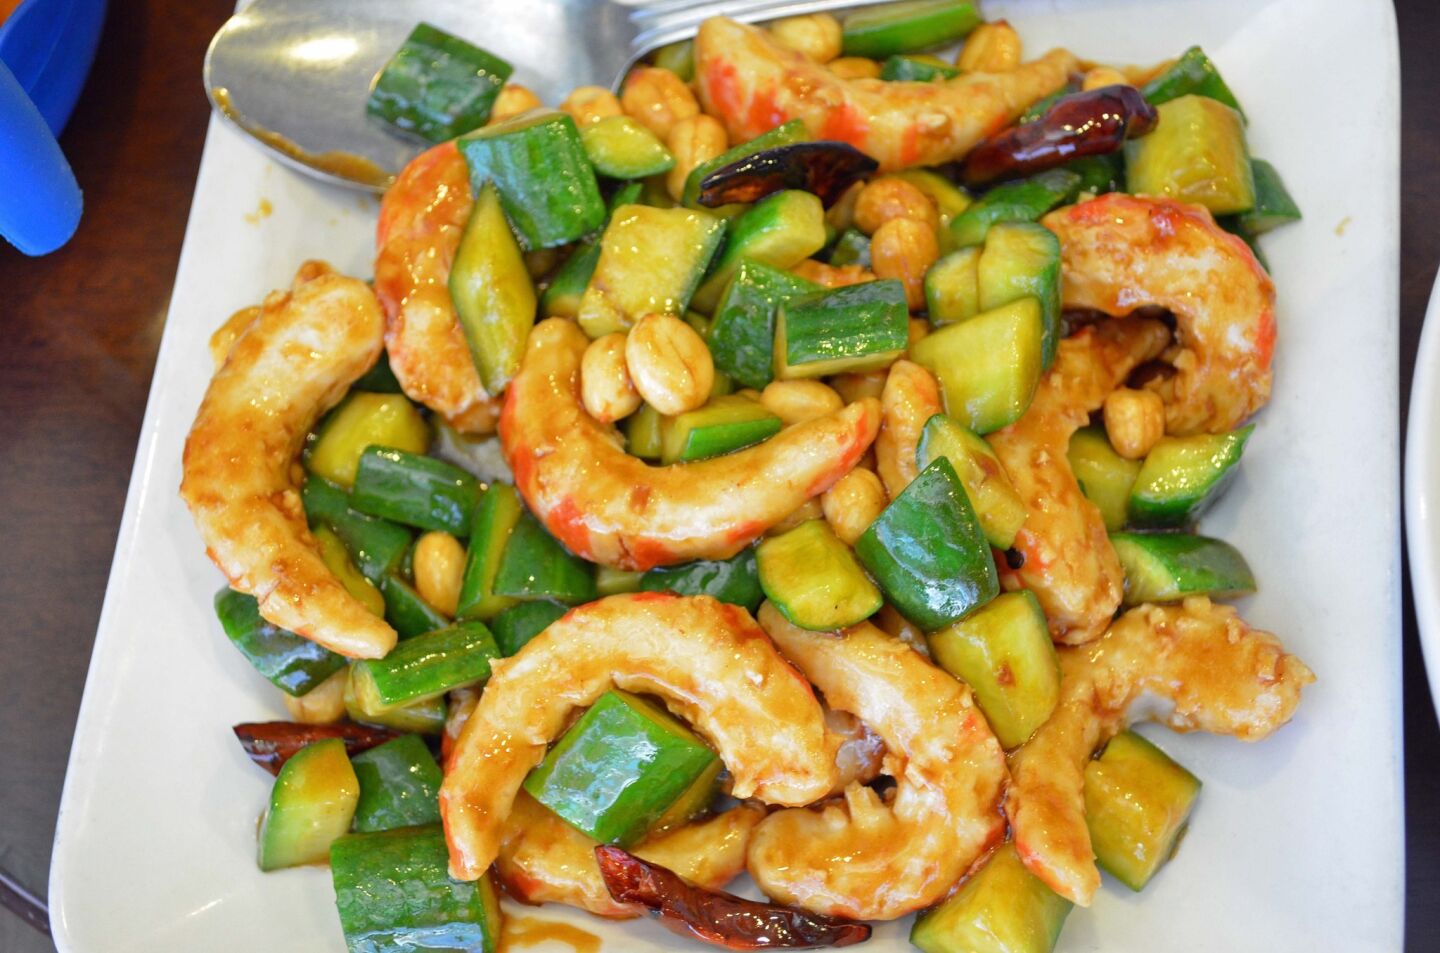 Kung pao "shrimp" made with cold cucumber slices, peanuts and chiles from Vege Paradise.